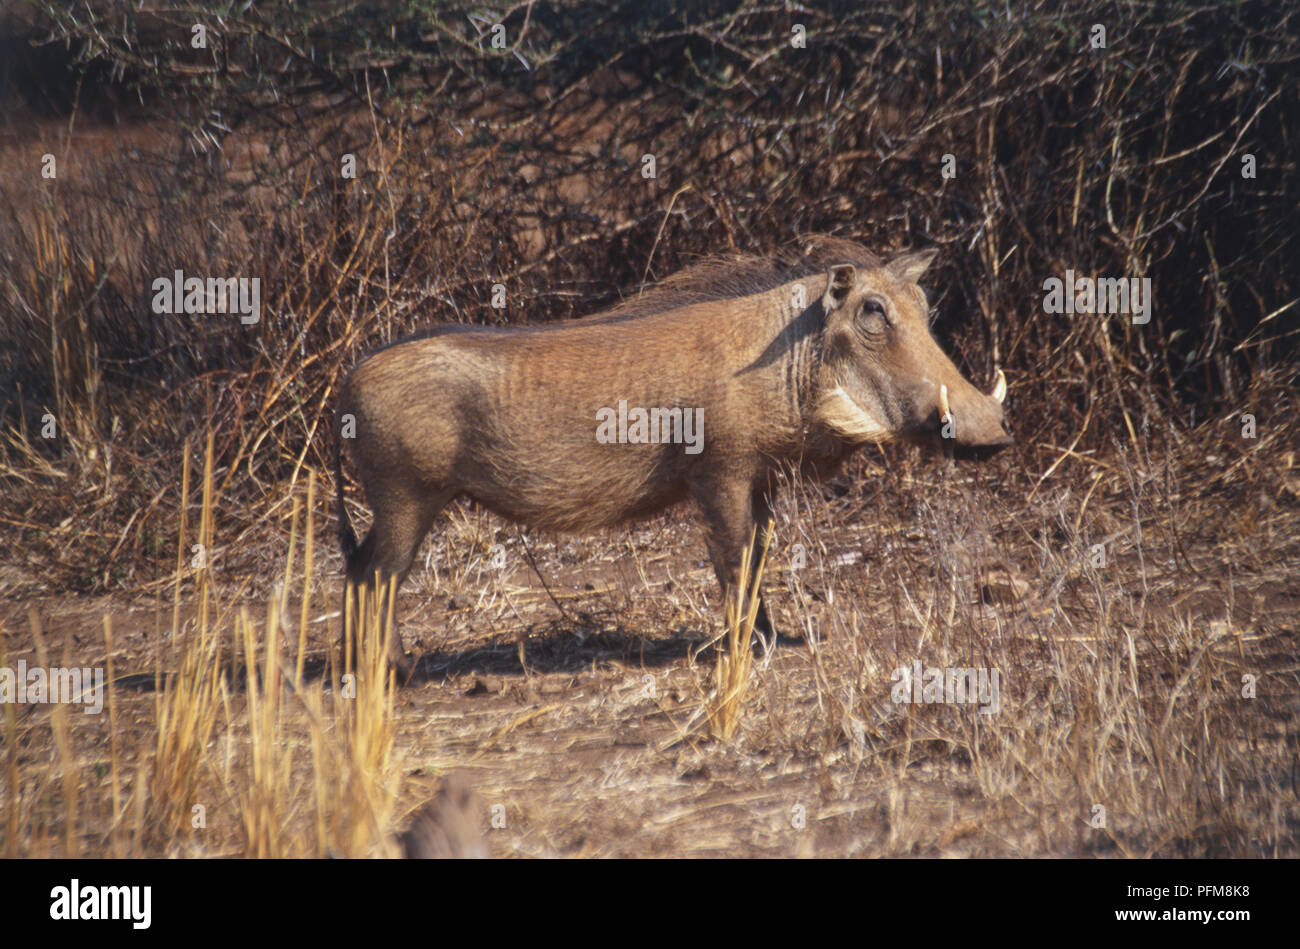 Side view of an African Warthog in the dry bush of the Kruger National Park, South Africa. July 26, 1998. Stock Photo